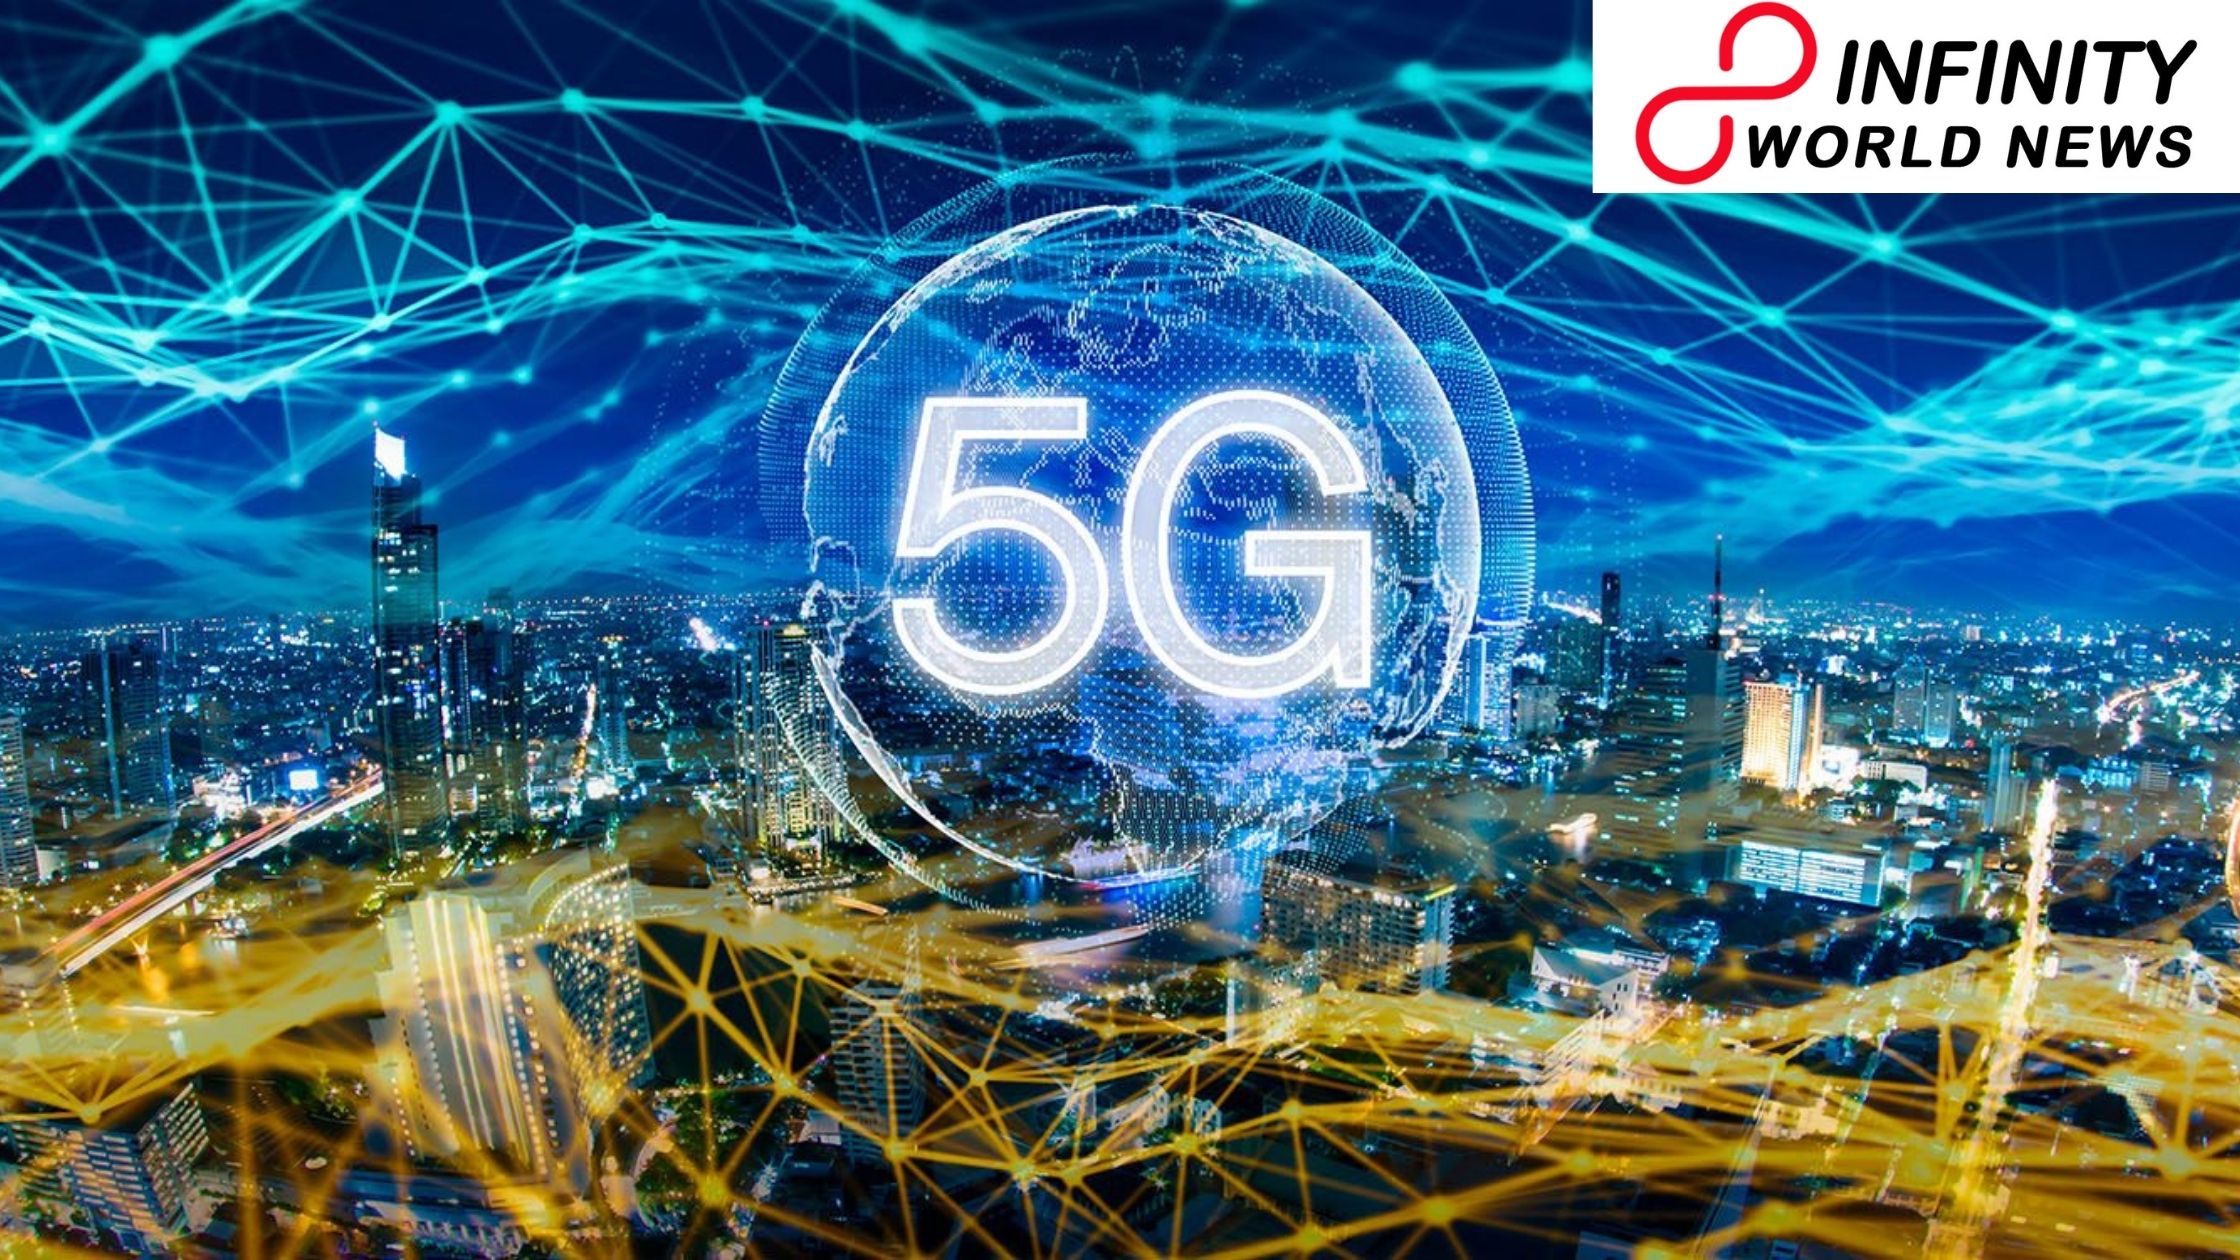 5G connection with arriving at 3.5 billion around the world, 350 million in India by 2026: Report